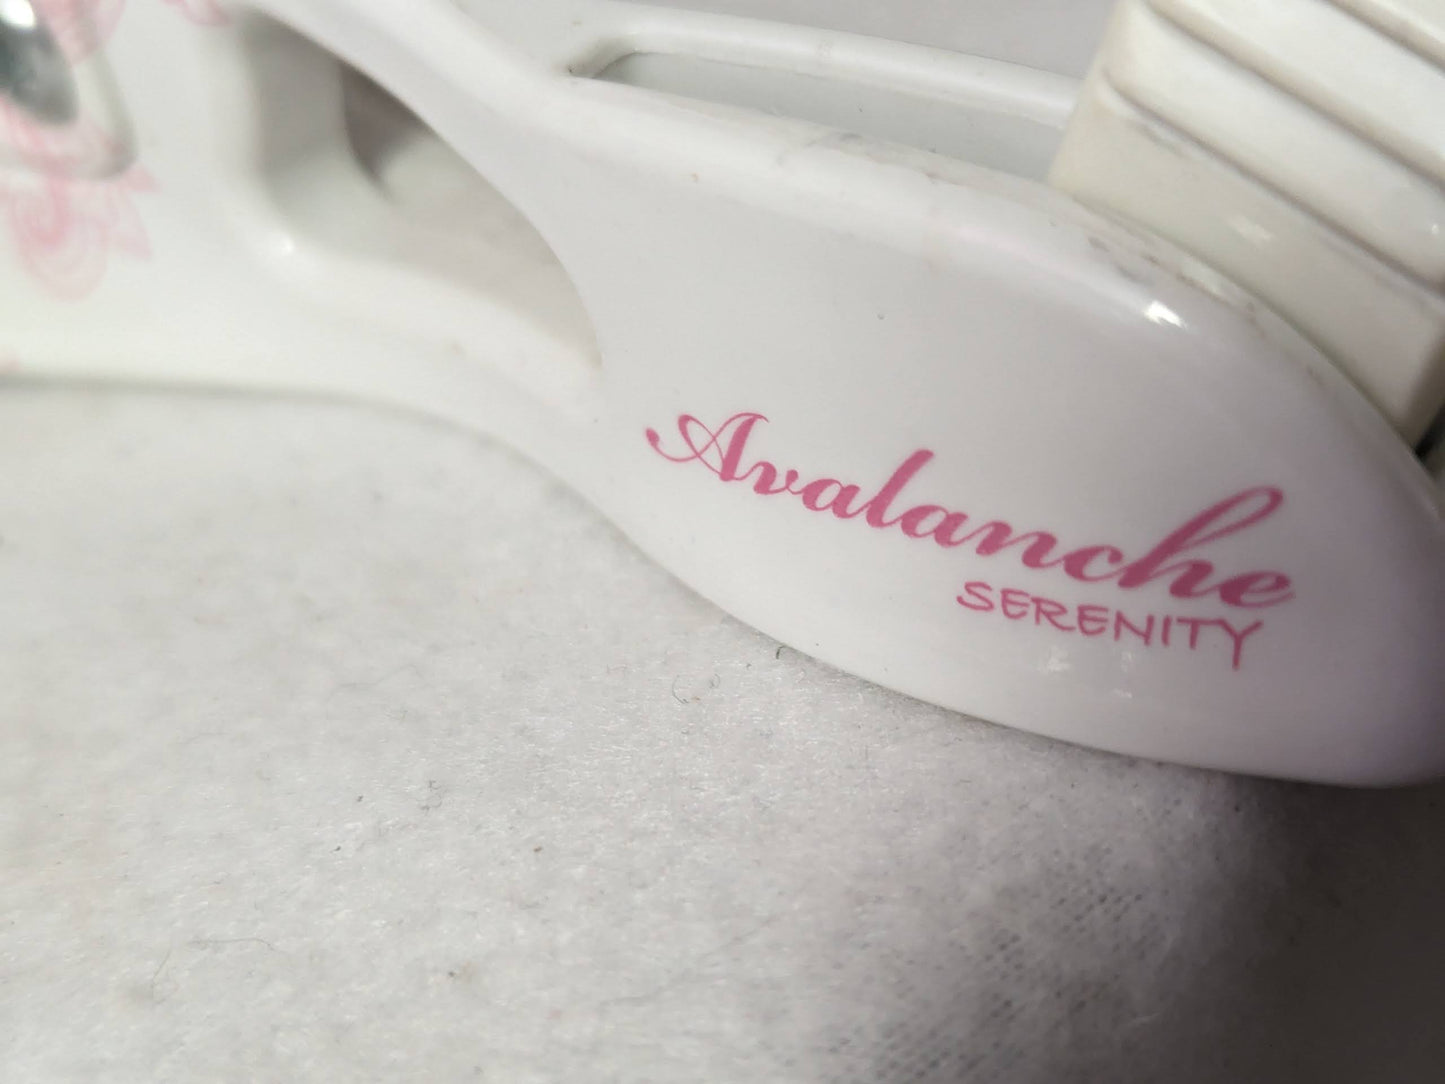 Avalanche Serenity Snowboard Bindings Size S/M? Color White Condition Used